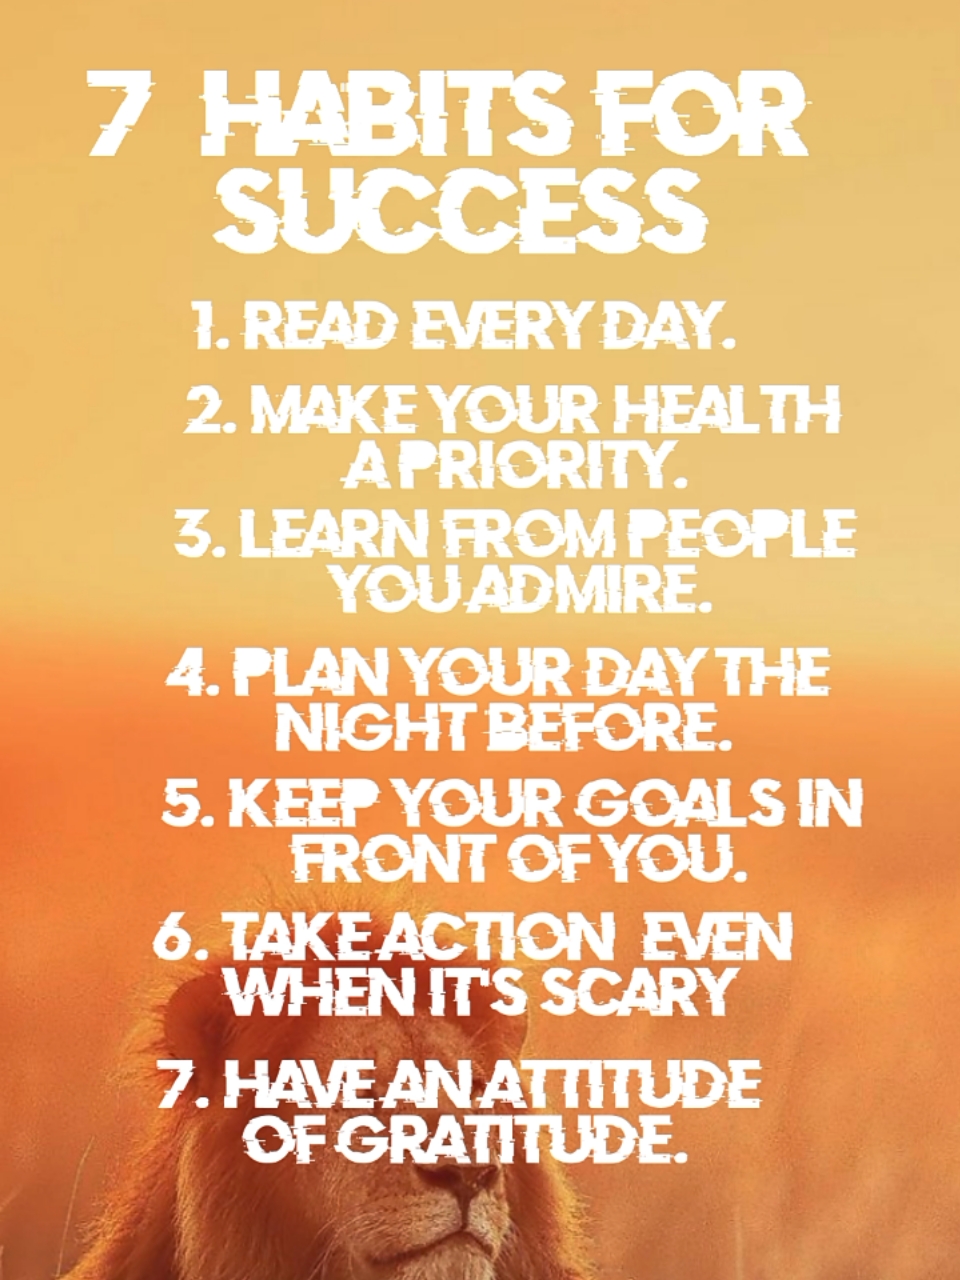 7 habits for success quotes